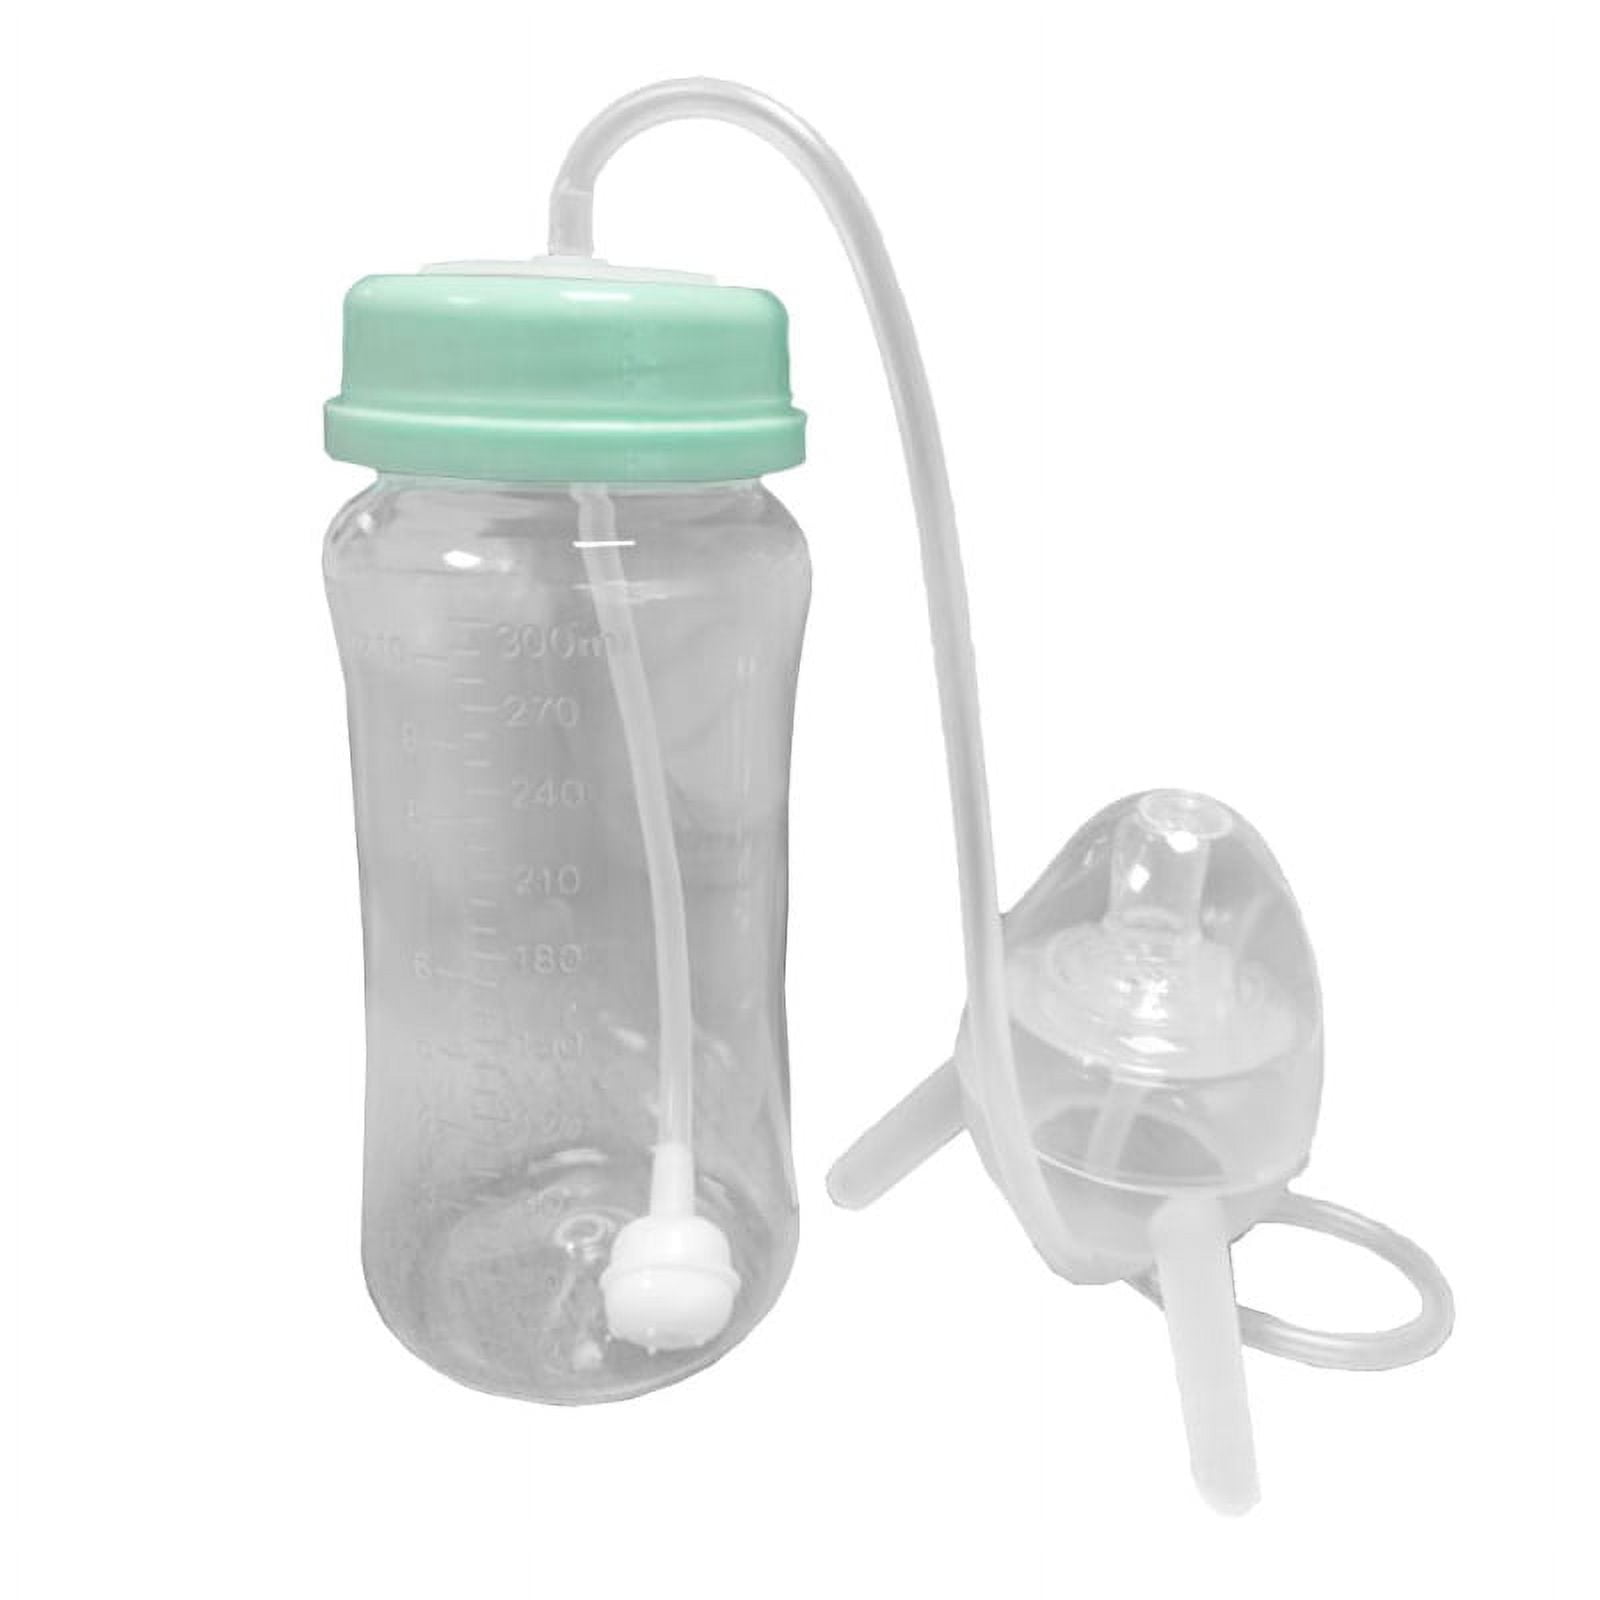 Infant & Toddler Anti-choke Multi-functional Bottle Mouth Adapter With  Straw, 2 Types Of Adapters Fit Most Beverage/water Bottle Mouth, 22cm Long  Straw Included, Comes With A Straw Storage Box